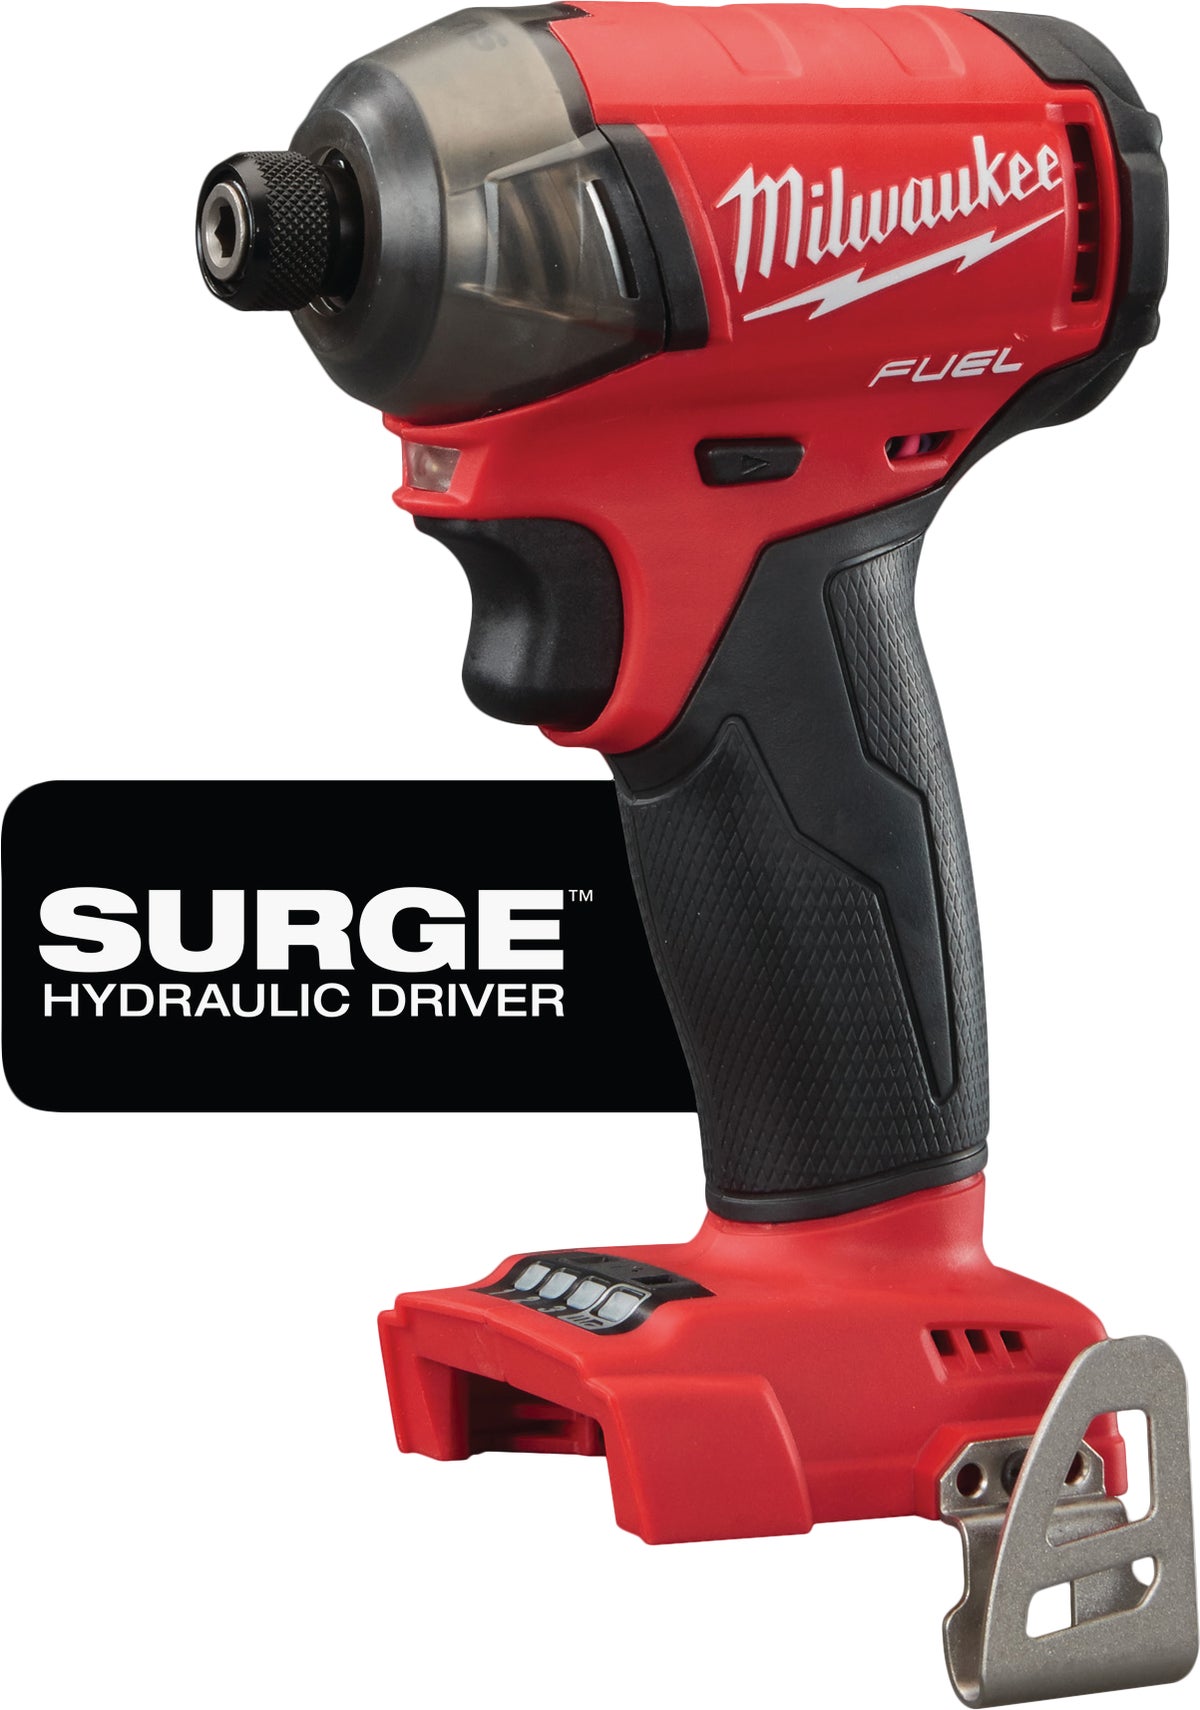 MW M18 FUEL SURGE Lithium-Ion Brushless Cordless Impact Driver  1 4 In. Hex